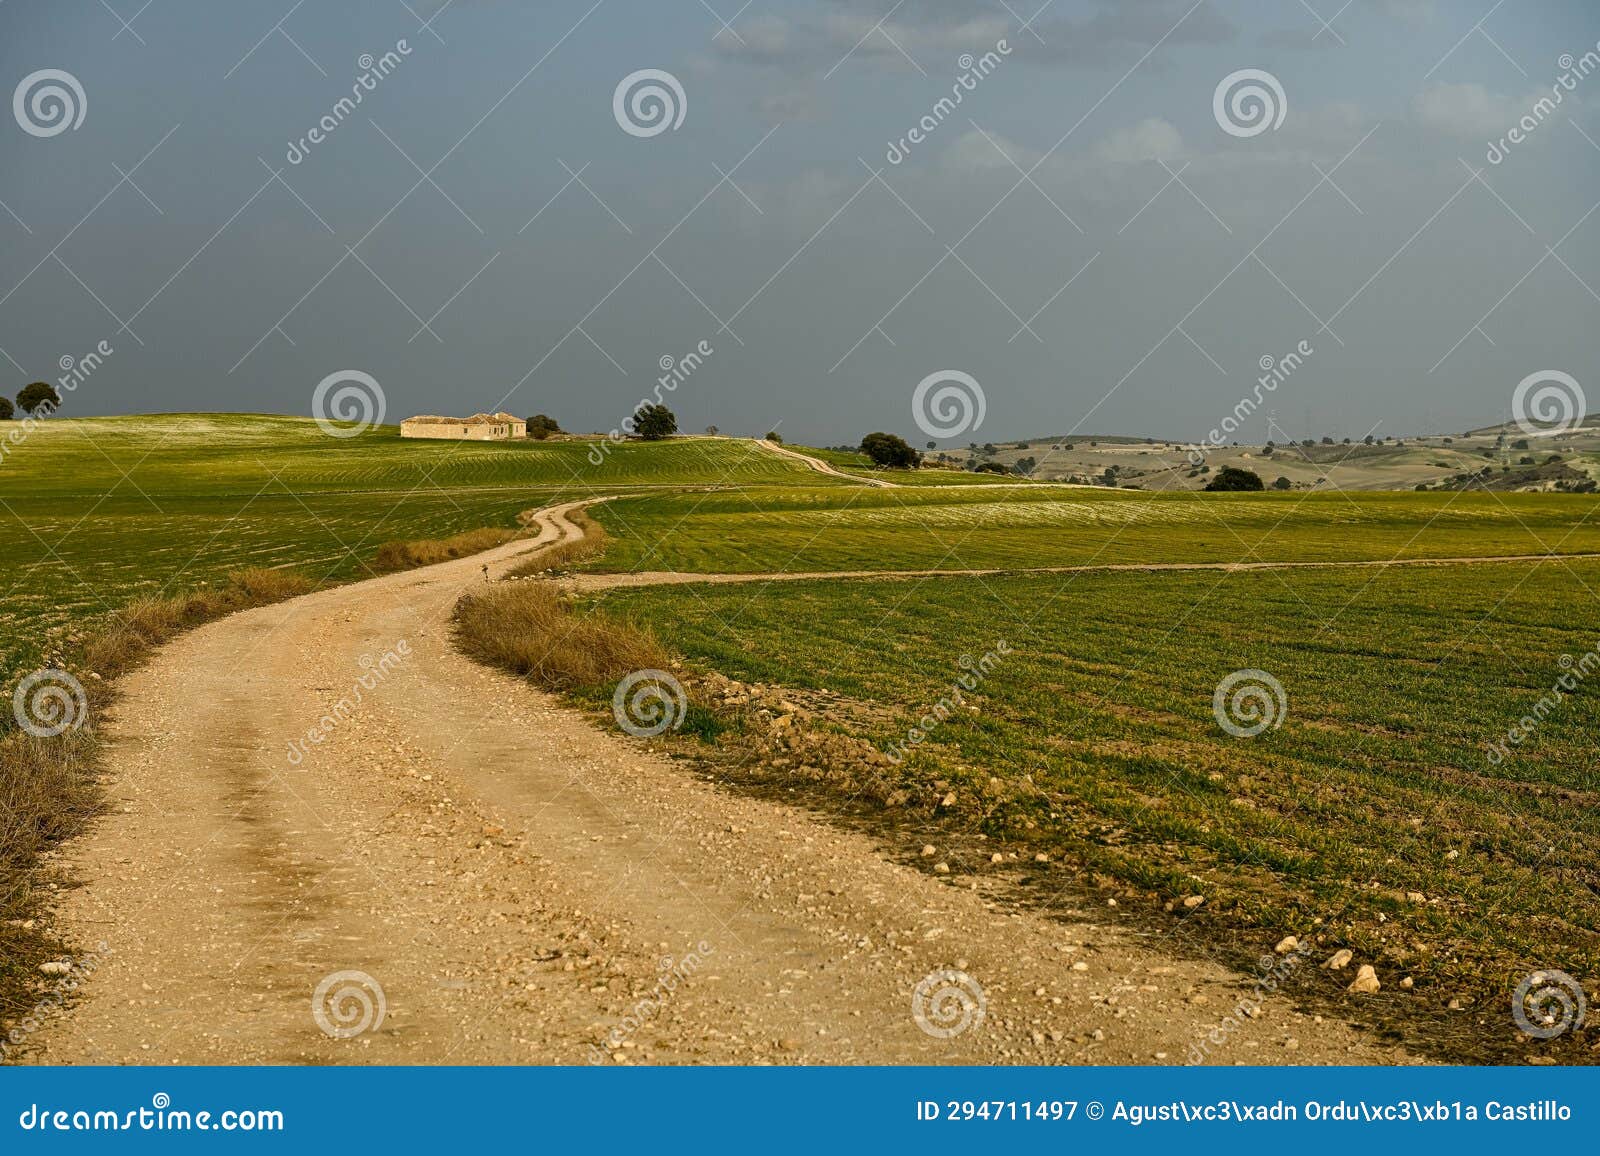 path of the cereal pasture of the sierra oriental in granada - spain.